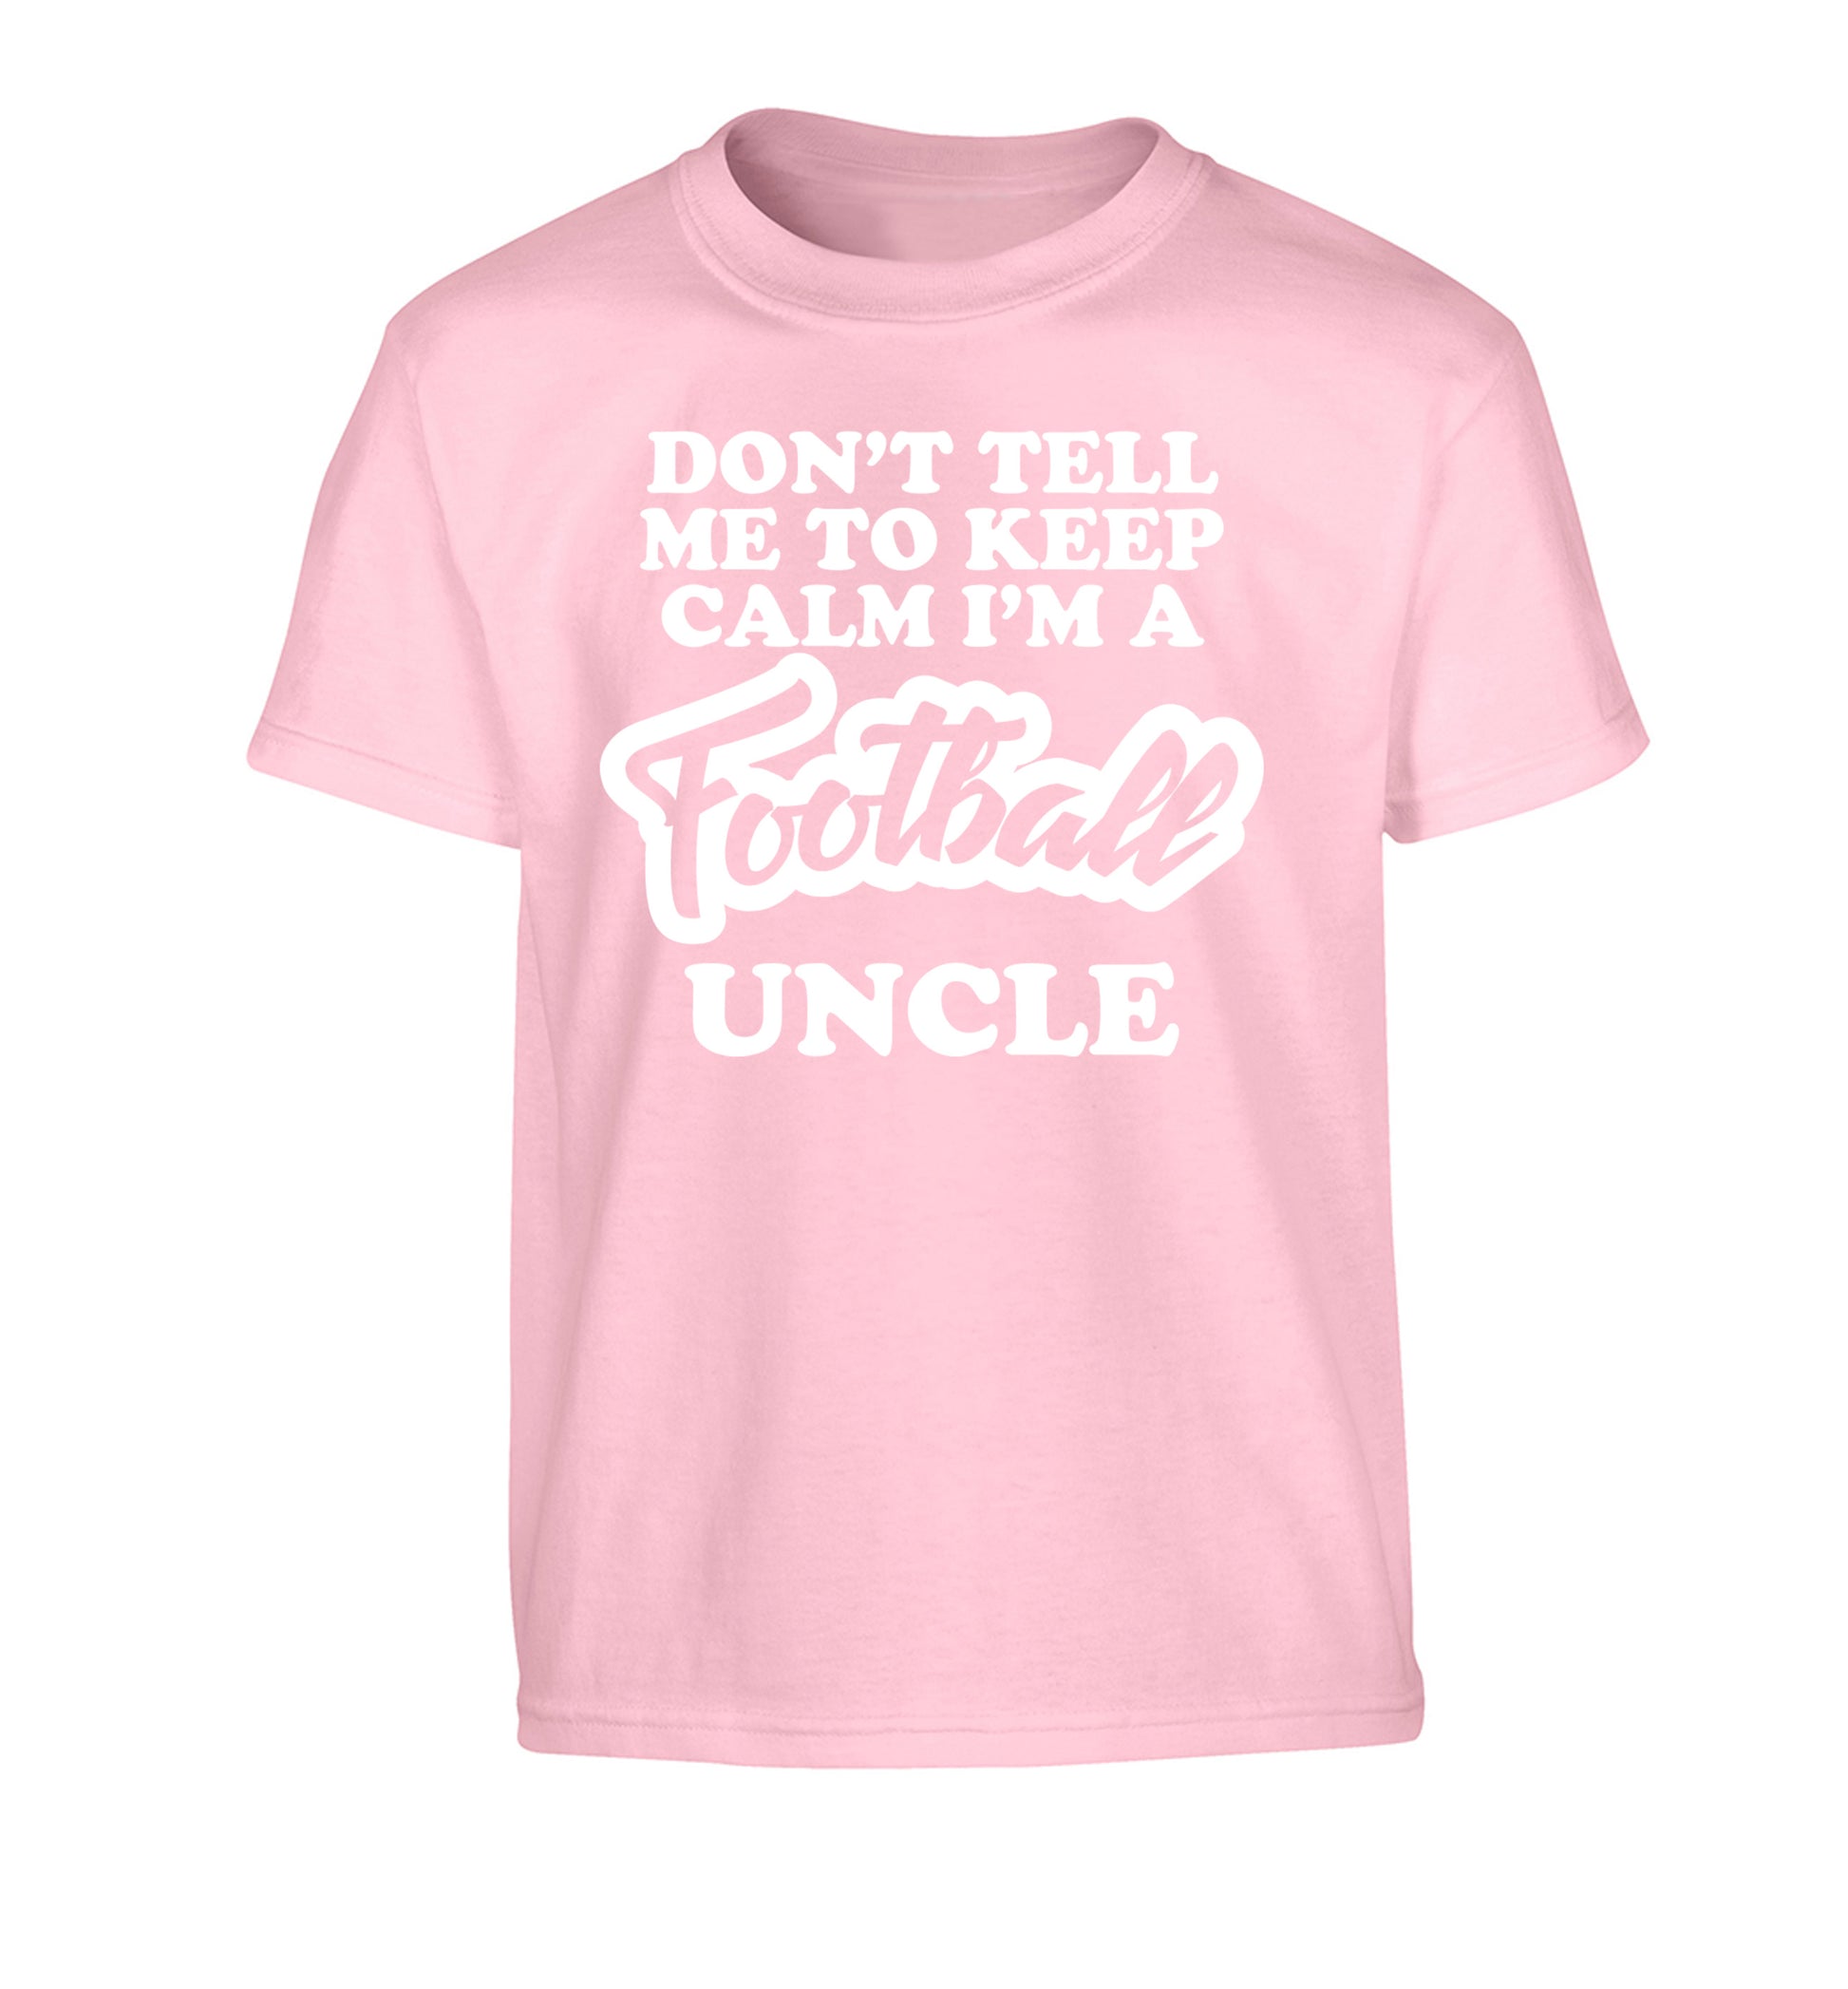 Worlds most amazing football uncle Children's light pink Tshirt 12-14 Years